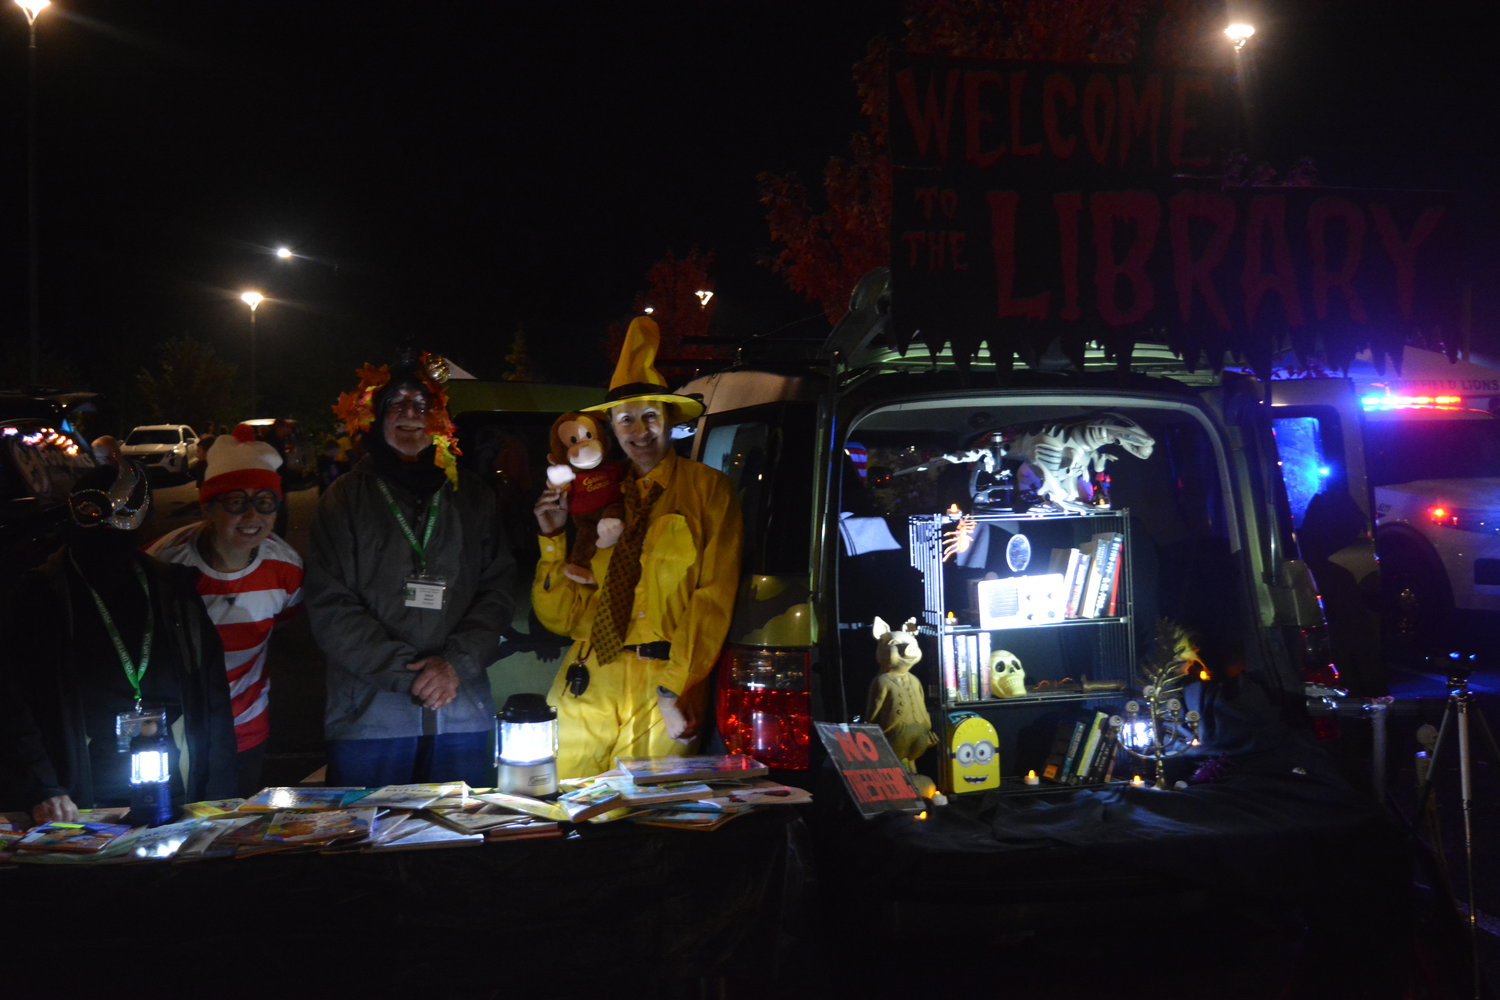 Volunteers with the Friends of Ridgefield Community Library show off their table of books at a trunk or treat event in Ridgefield on Oct. 29.